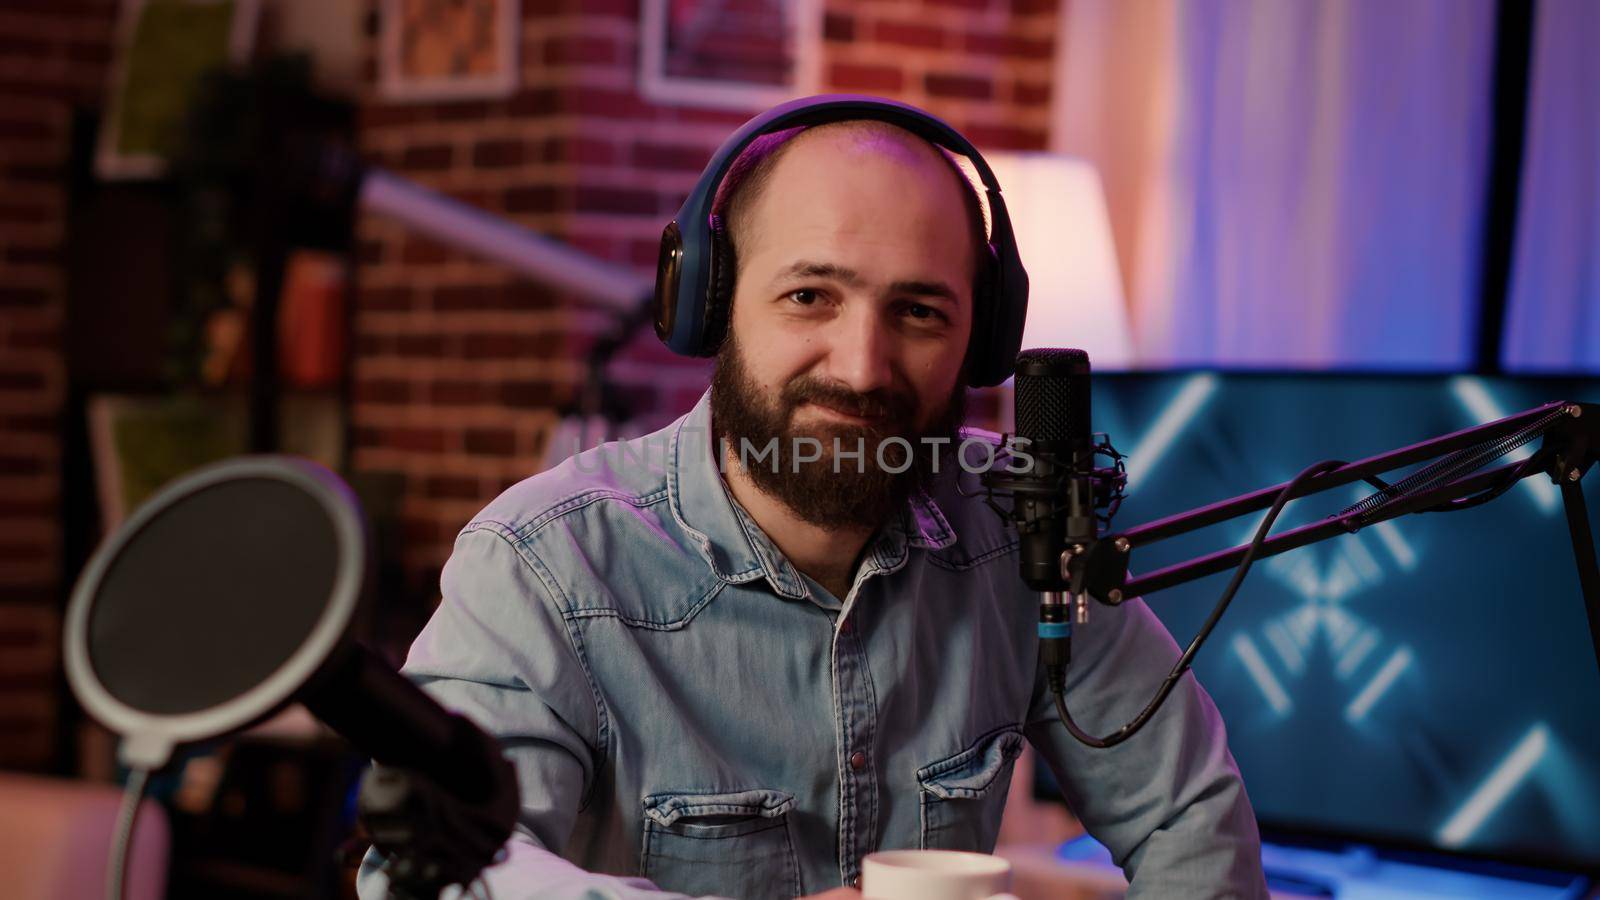 Closeup portrait of man recording online podcast with professional microphone smiling at camera sitting at desk. Online radio host with headphones streaming internet live show from home studio.